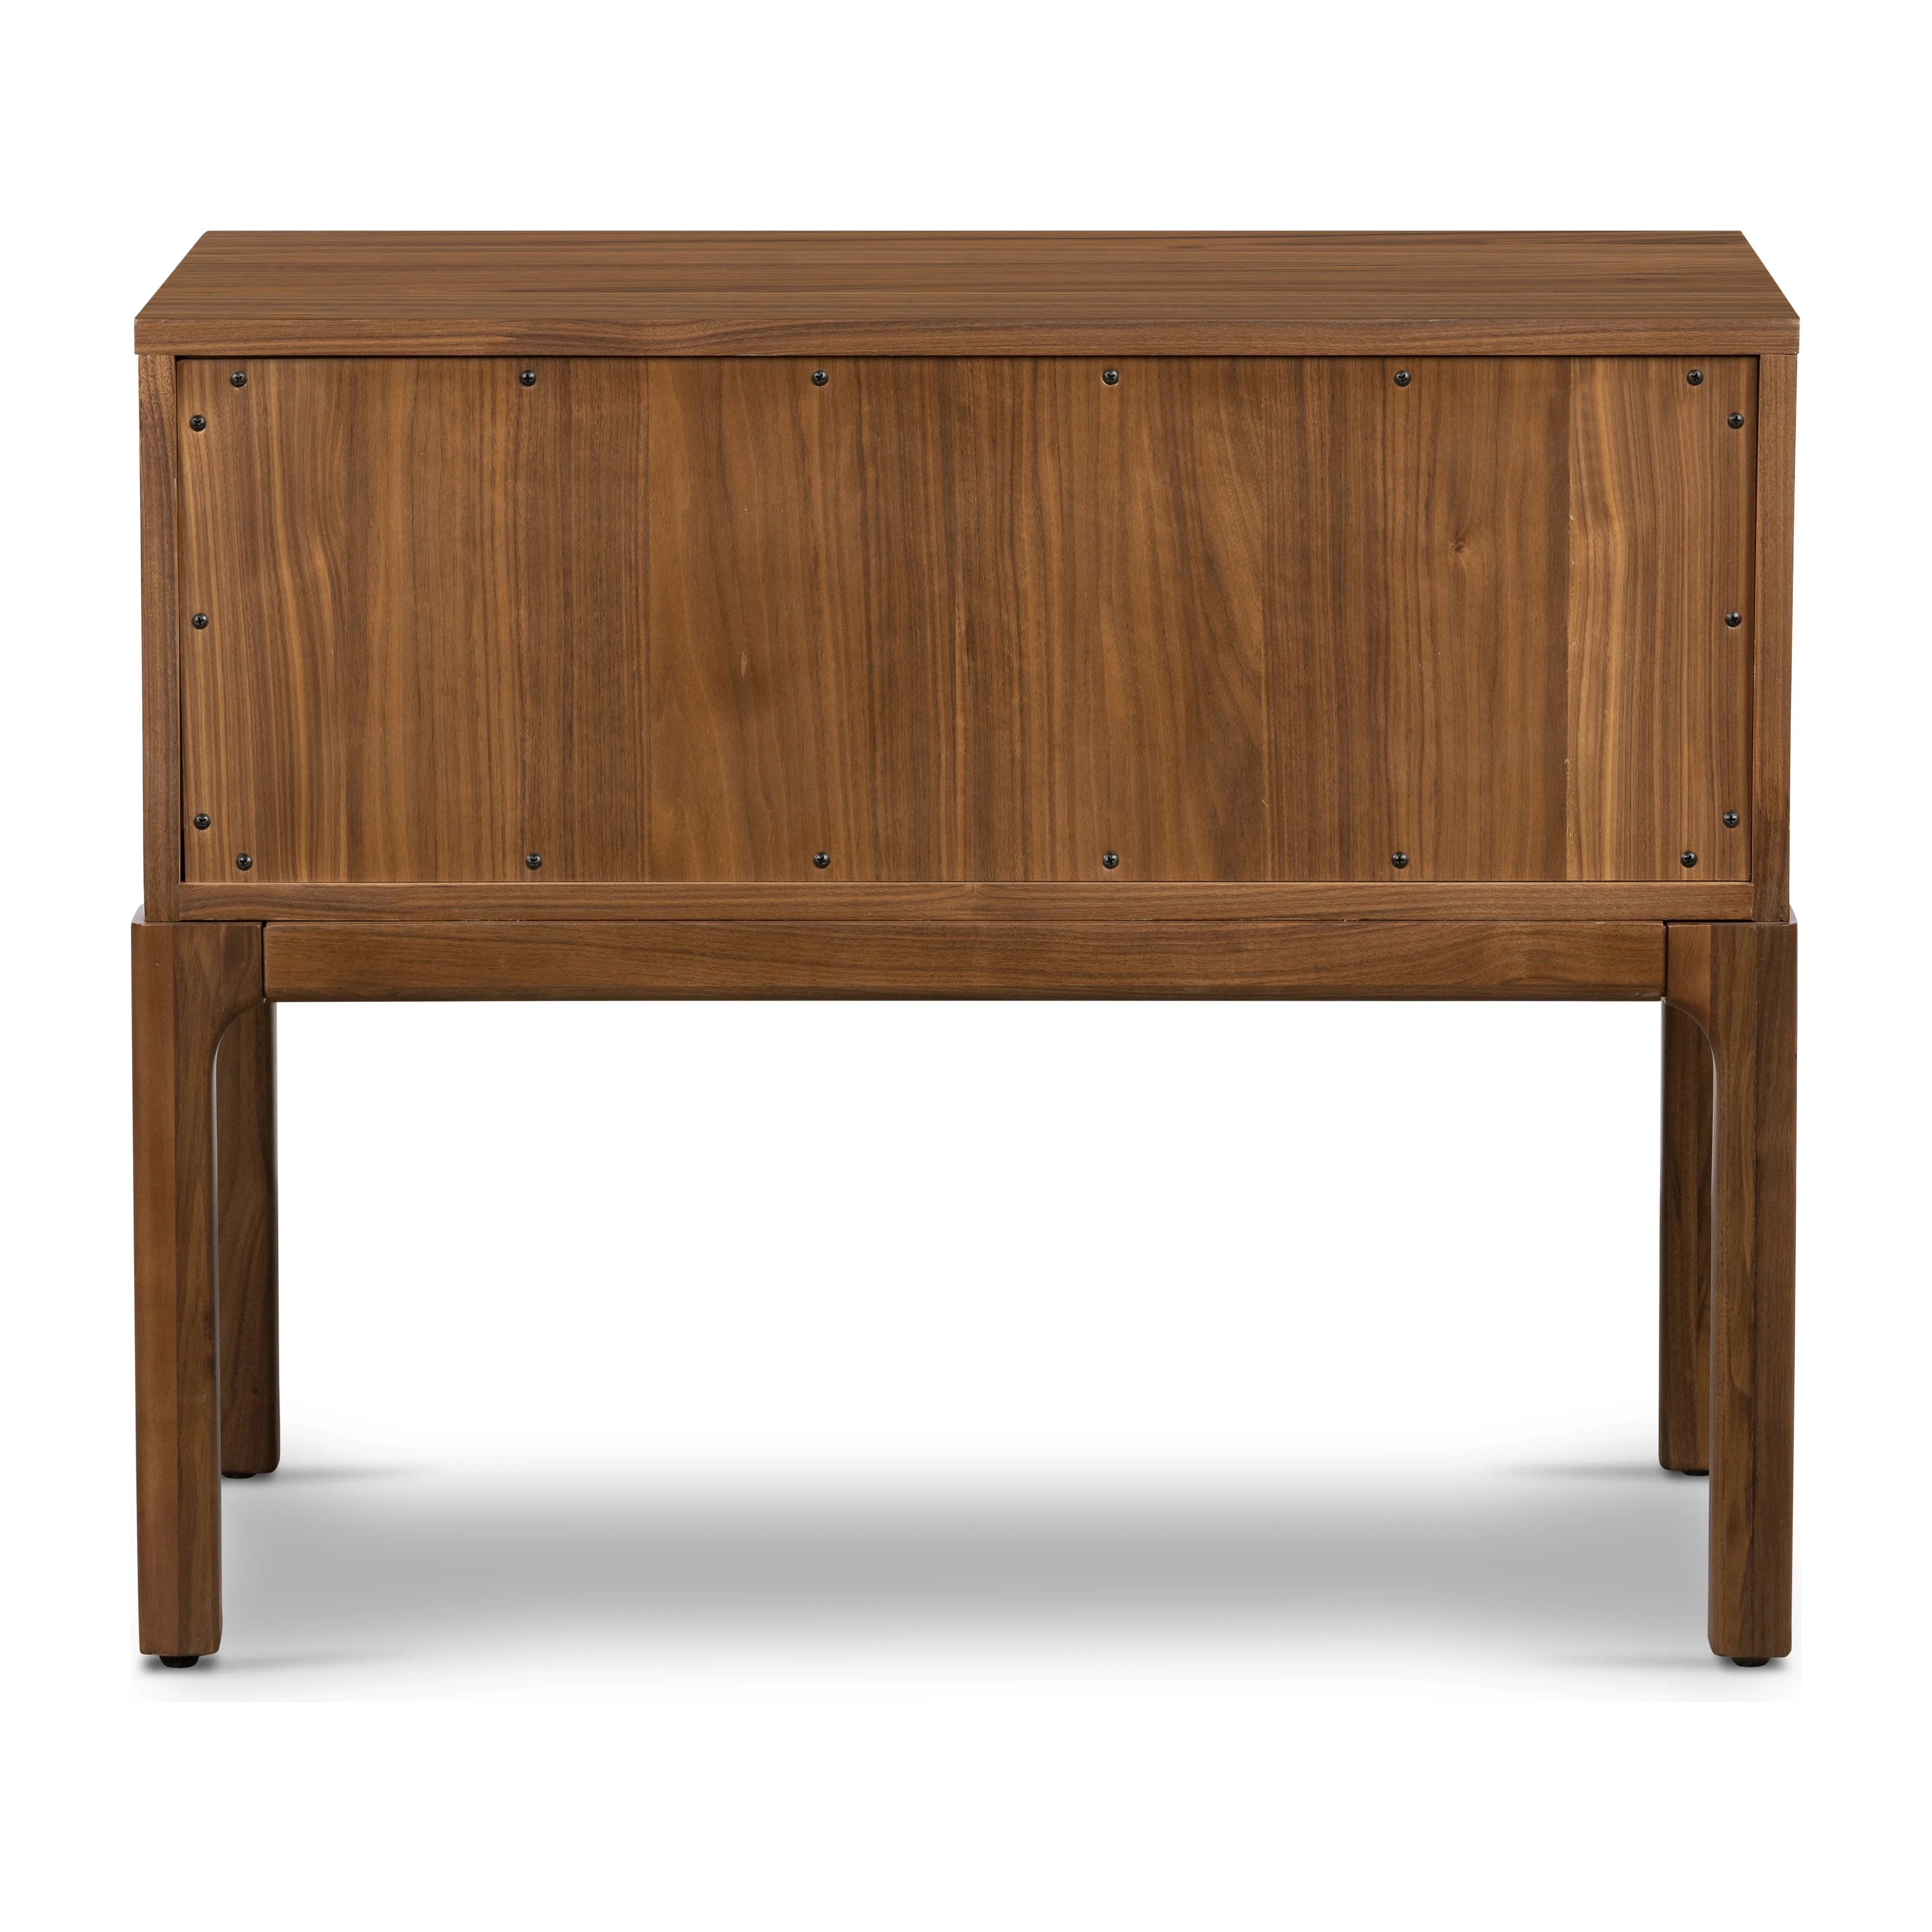 Inspired by campaign-style furniture of the 1800s â€” packable pieces first designed for traveling military use â€” a simply shaped nightstand of natural walnut features a subtly inset top and rounded legs, finished with wooden hardware Amethyst Home provides interior design, new home construction design consulting, vintage area rugs, and lighting in the Austin metro area.